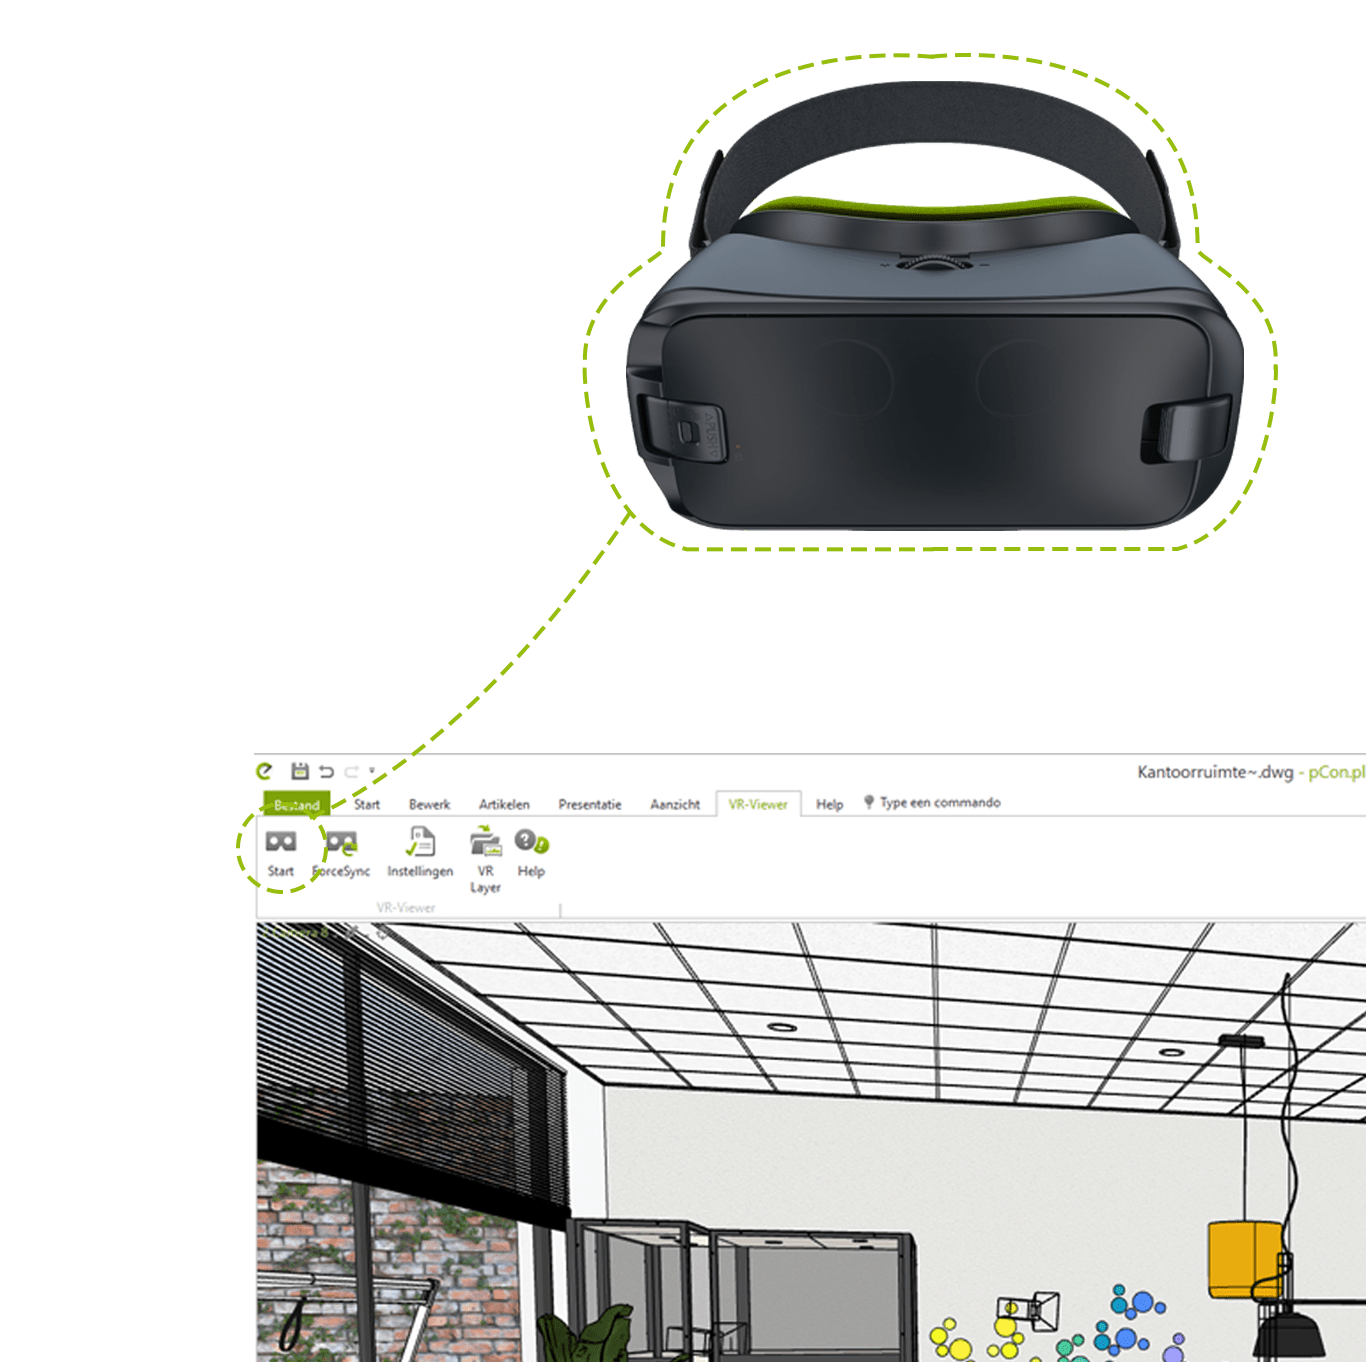 VR-Viewer glasses linked to pCon.planner: where to find the VR-Viewer Plugin in pCon.planner